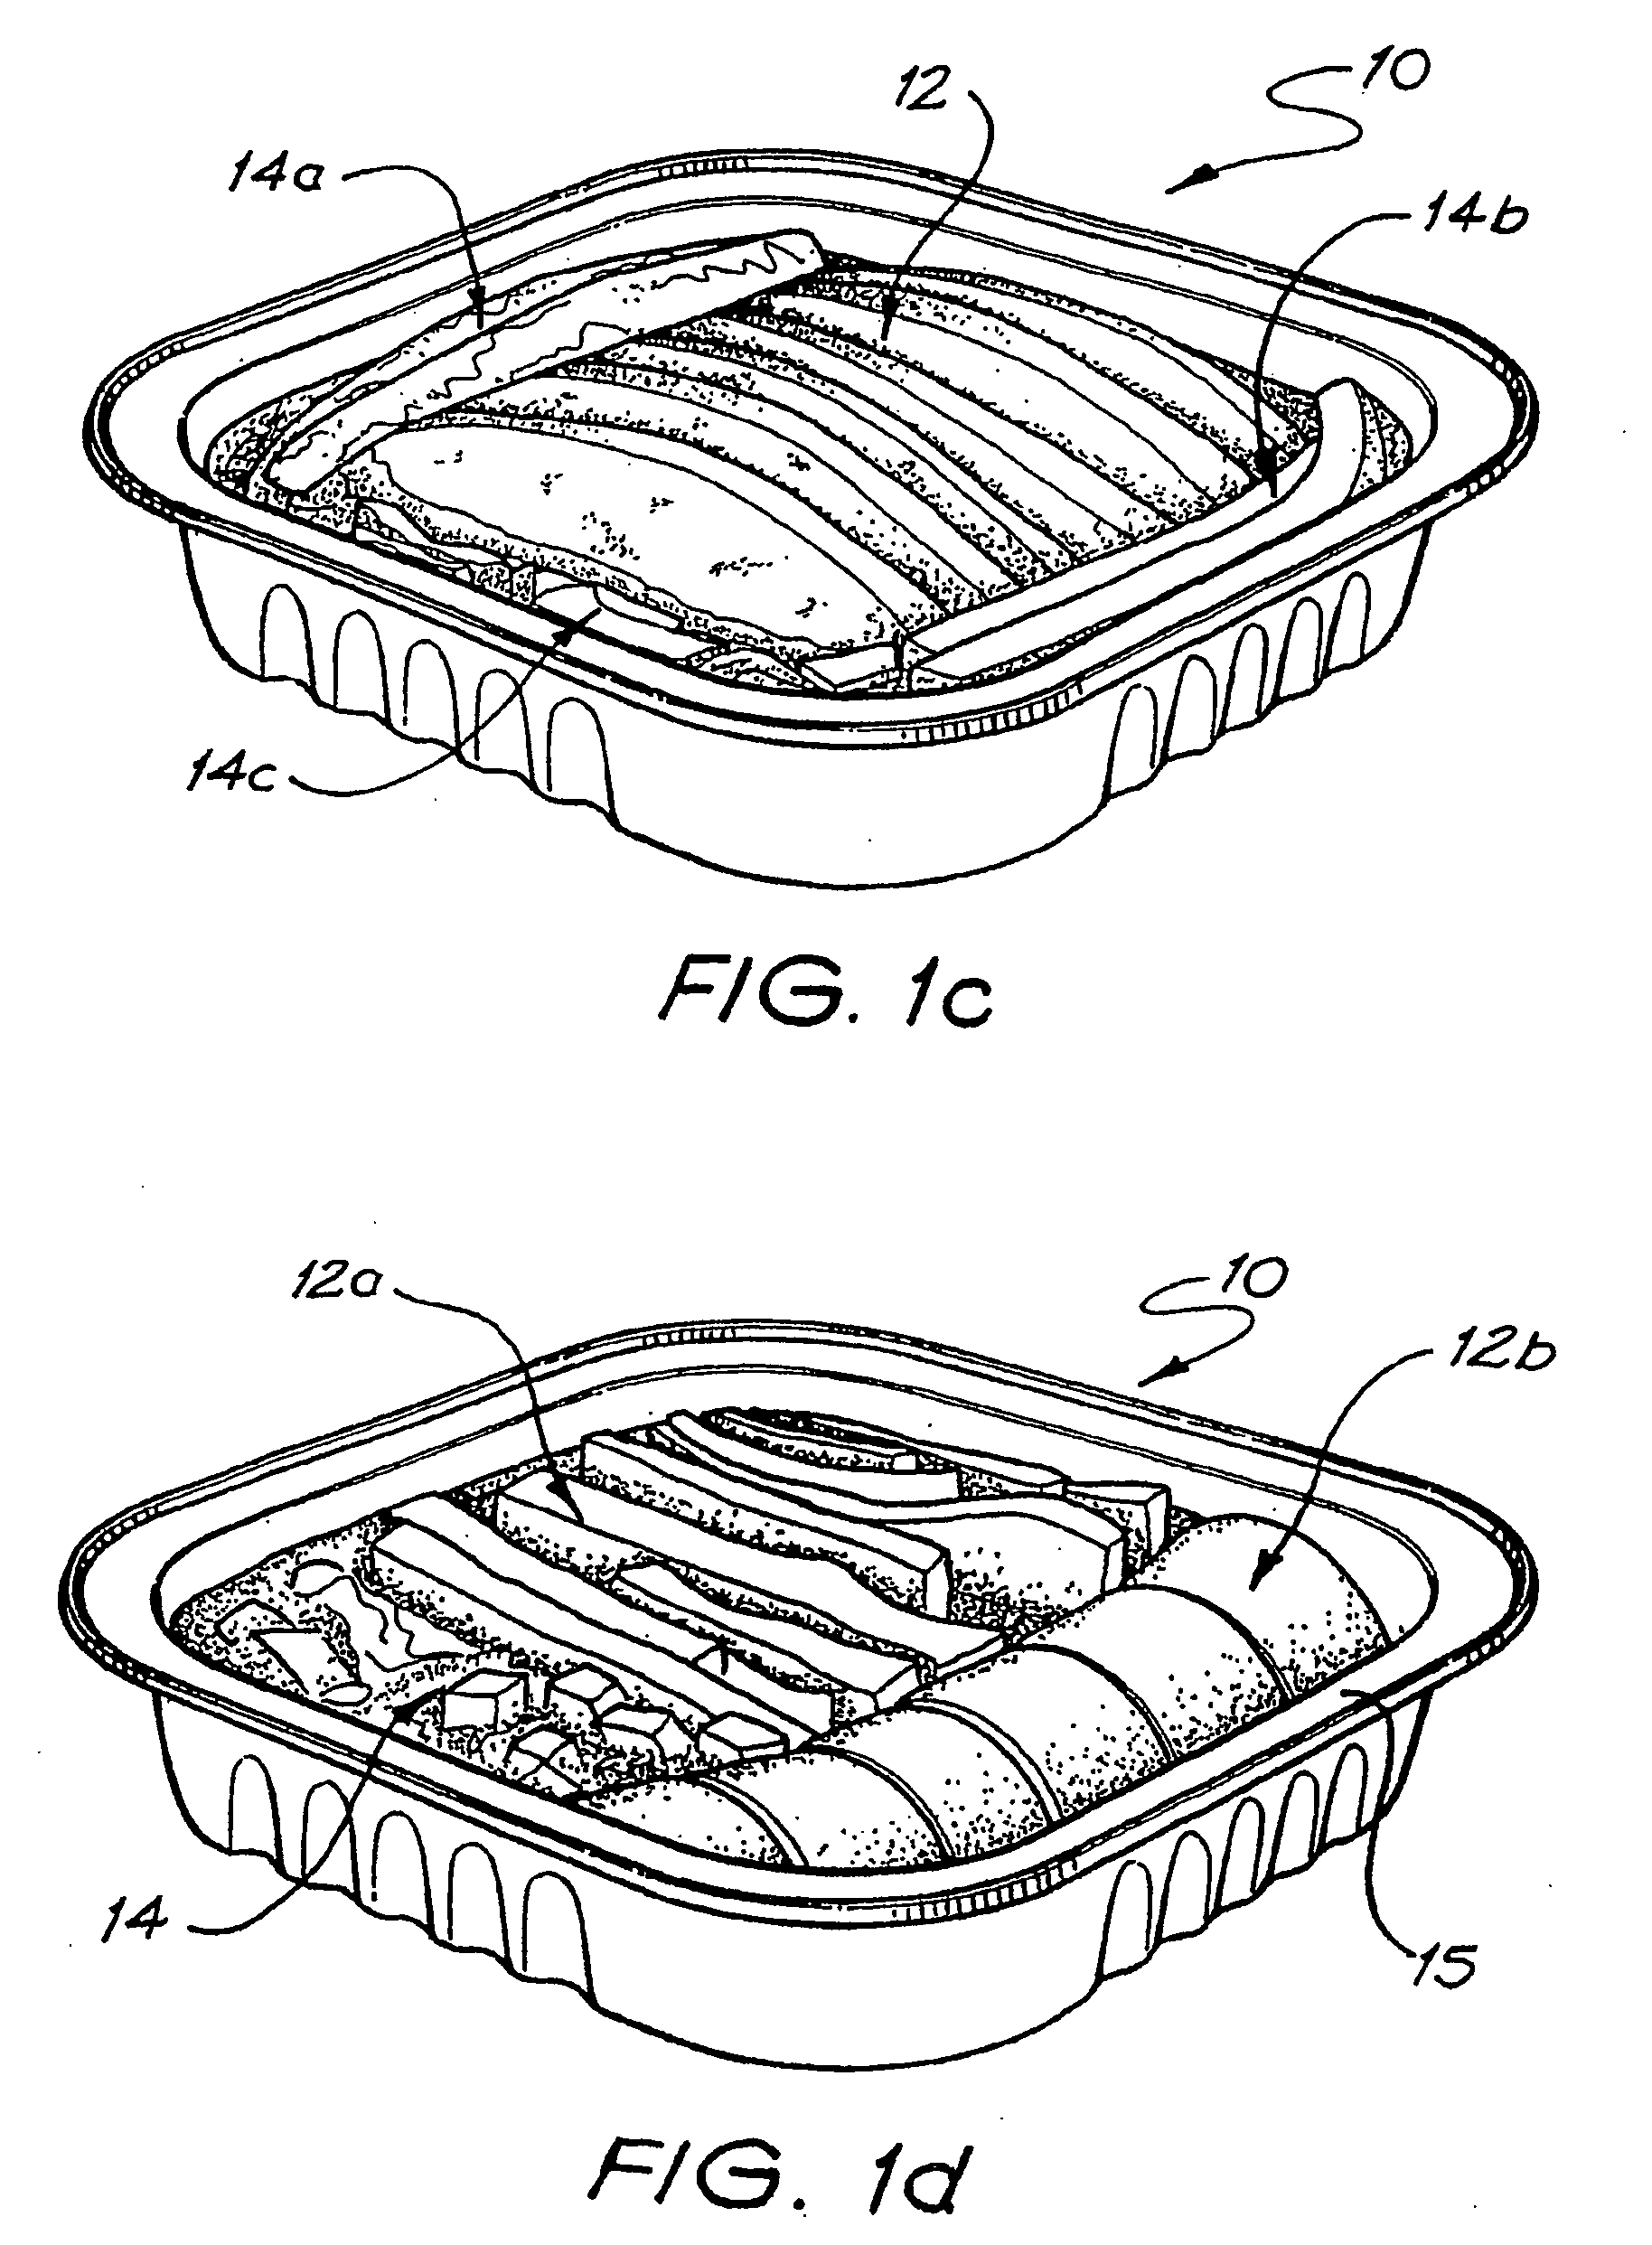 Canned pet food with sliced meat analogue